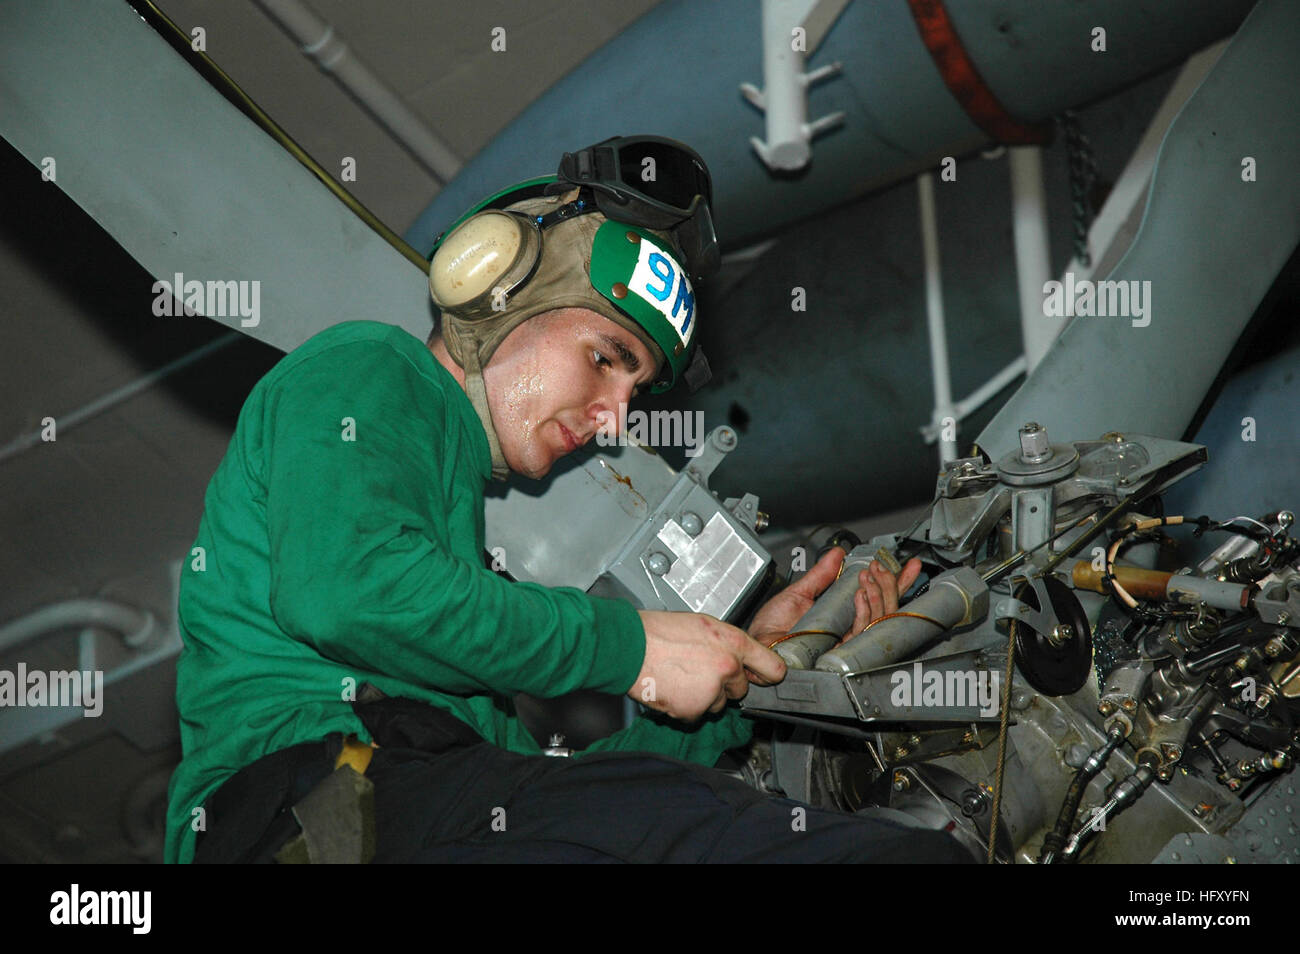 091215-N-3327M-064 NORTH ARABIAN SEA (Dec. 15, 2009) Aviation Structural Mechanic 3rd Class John Kerr, assigned to the Indians of Helicopter Anti-Submarine Squadron (HS) 6, conducts maintenance on the tail rig of an HH-60S Sea Hawk helicopter aboard the aircraft carrier USS Nimitz (CVN 68). Nimitz and the Nimitz Carrier Strike Group are on a scheduled deployment to the U.S. 5th Fleet area of responsibility. (U.S. Navy photo by Mass Communication Specialist 3rd Class James Mitchell/Released) US Navy 091215-N-3327M-064 Aviation Structural Mechanic 3rd Class John Kerr, assigned to the Indians of  Stock Photo